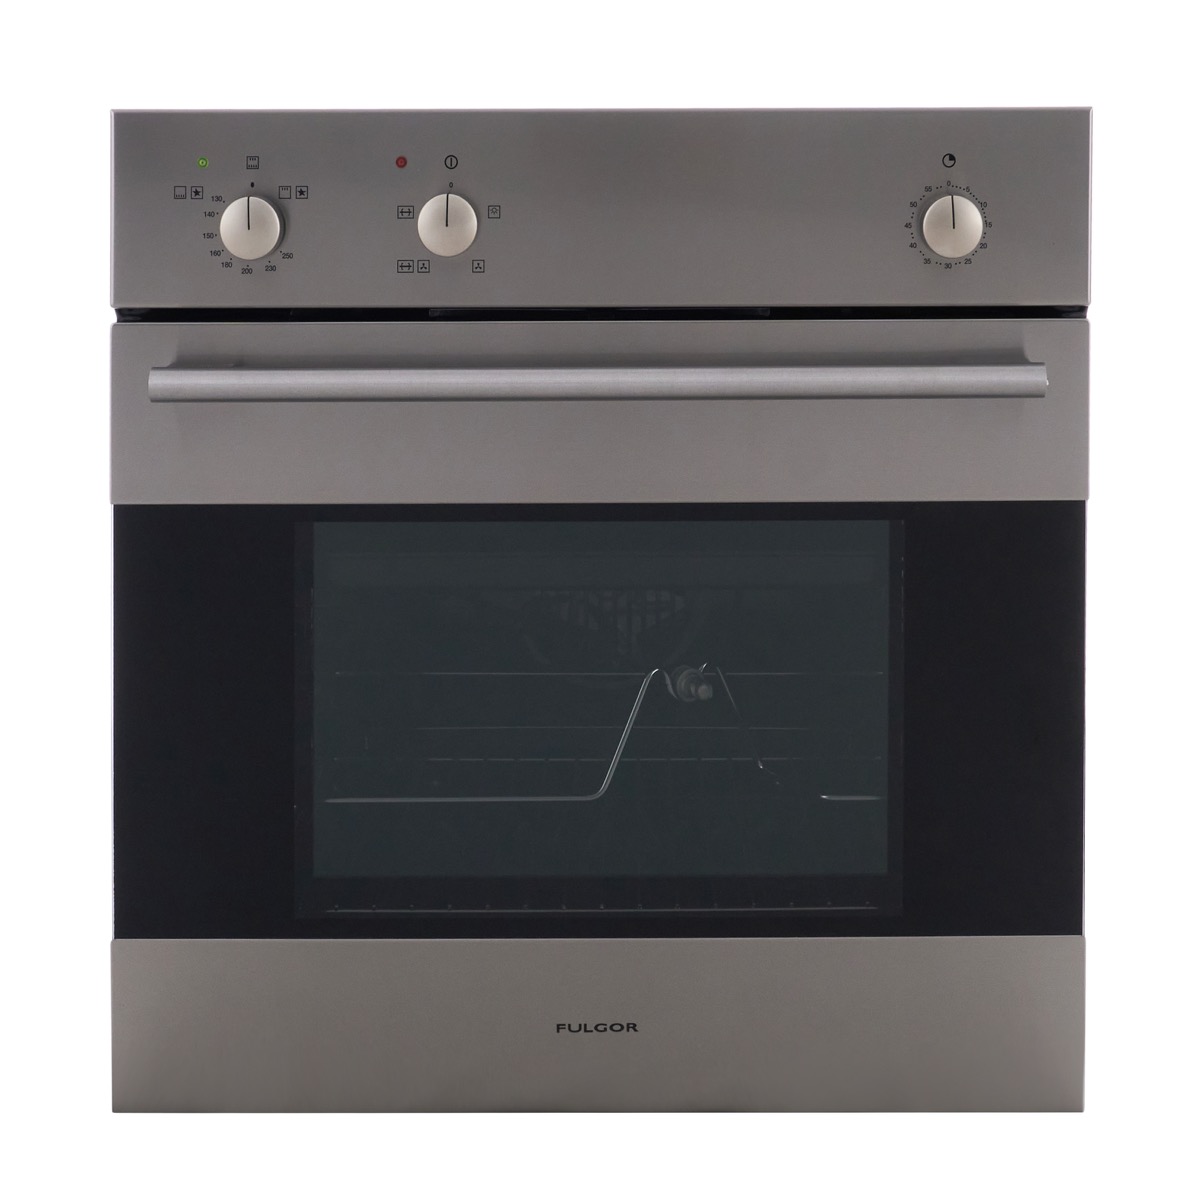 Fulgor Built-in Gas Oven,  with Grill, 58 Litres, Stainless Steel-OF GG M64 T